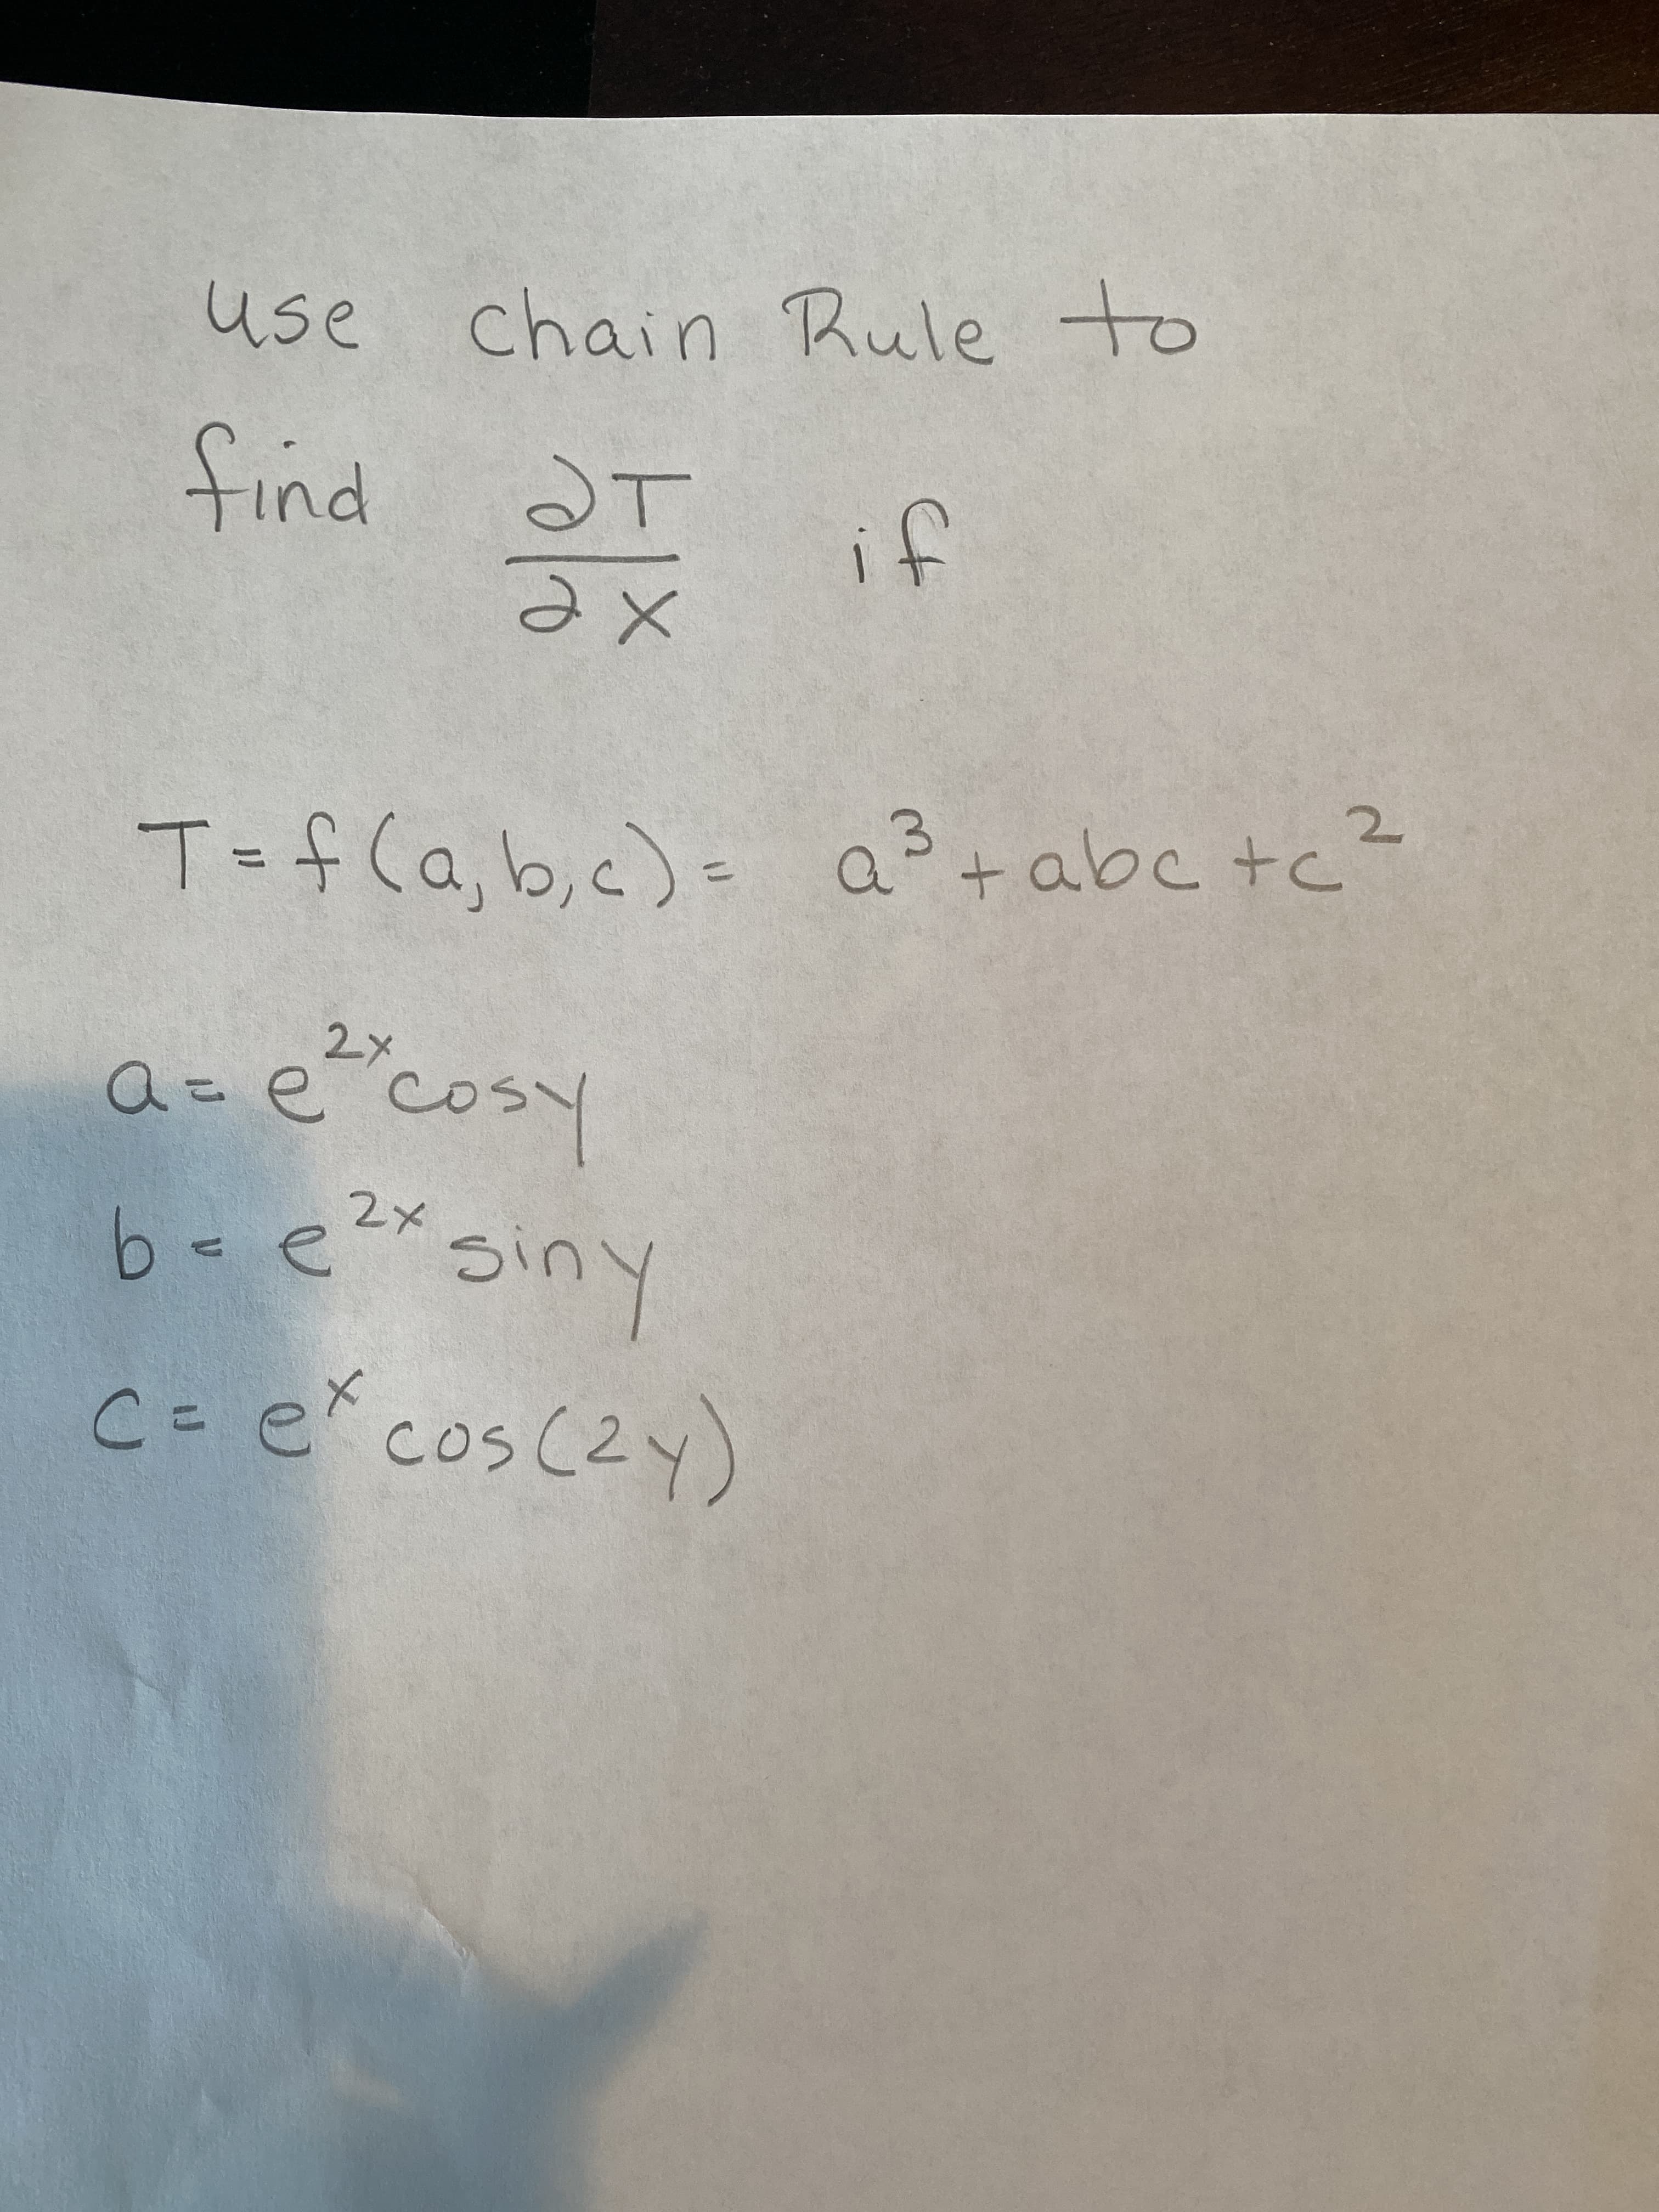 Cos(2.
C= e cos (2Y)
Luie
メて
T=f(a,b,c)= a+abc +c
%3D
xe
Ie puit
T
use chain Rule to
use
